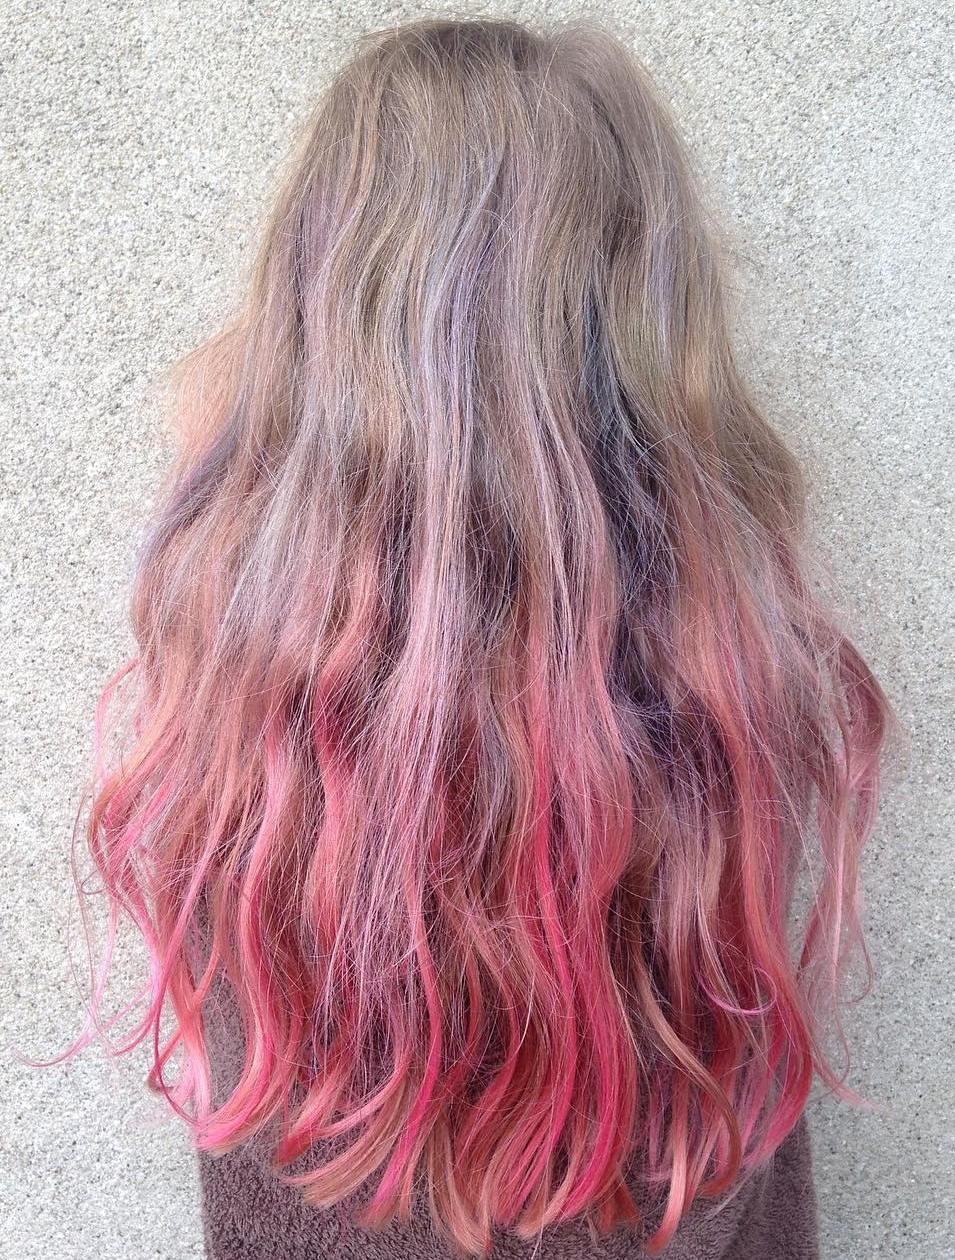 dlho Hair With Pastel Pink Ombre